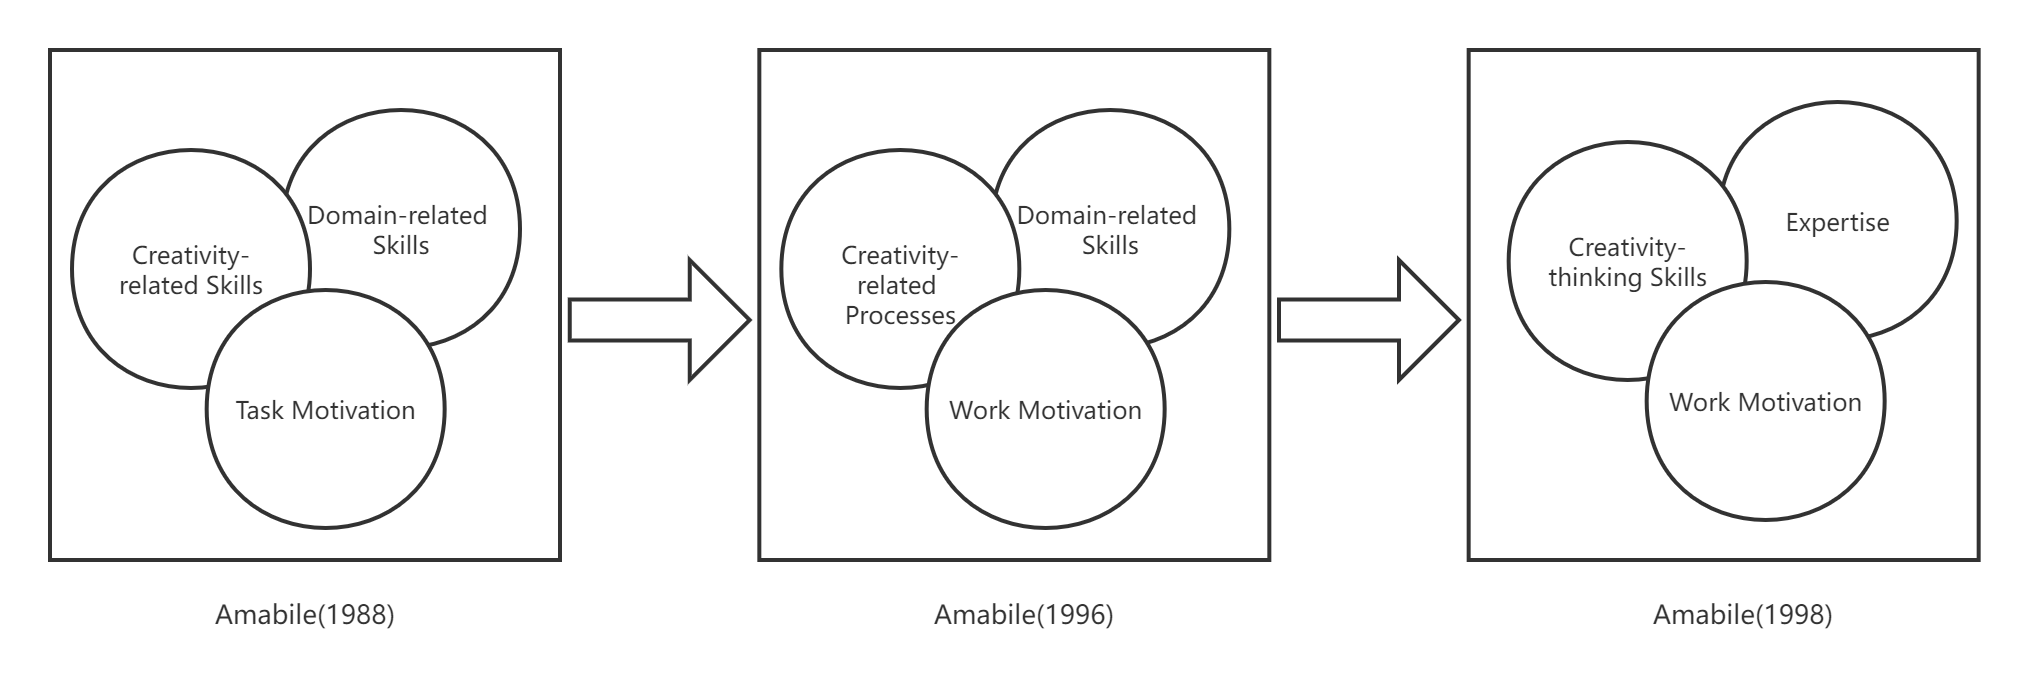 The development of the componential model of creativity